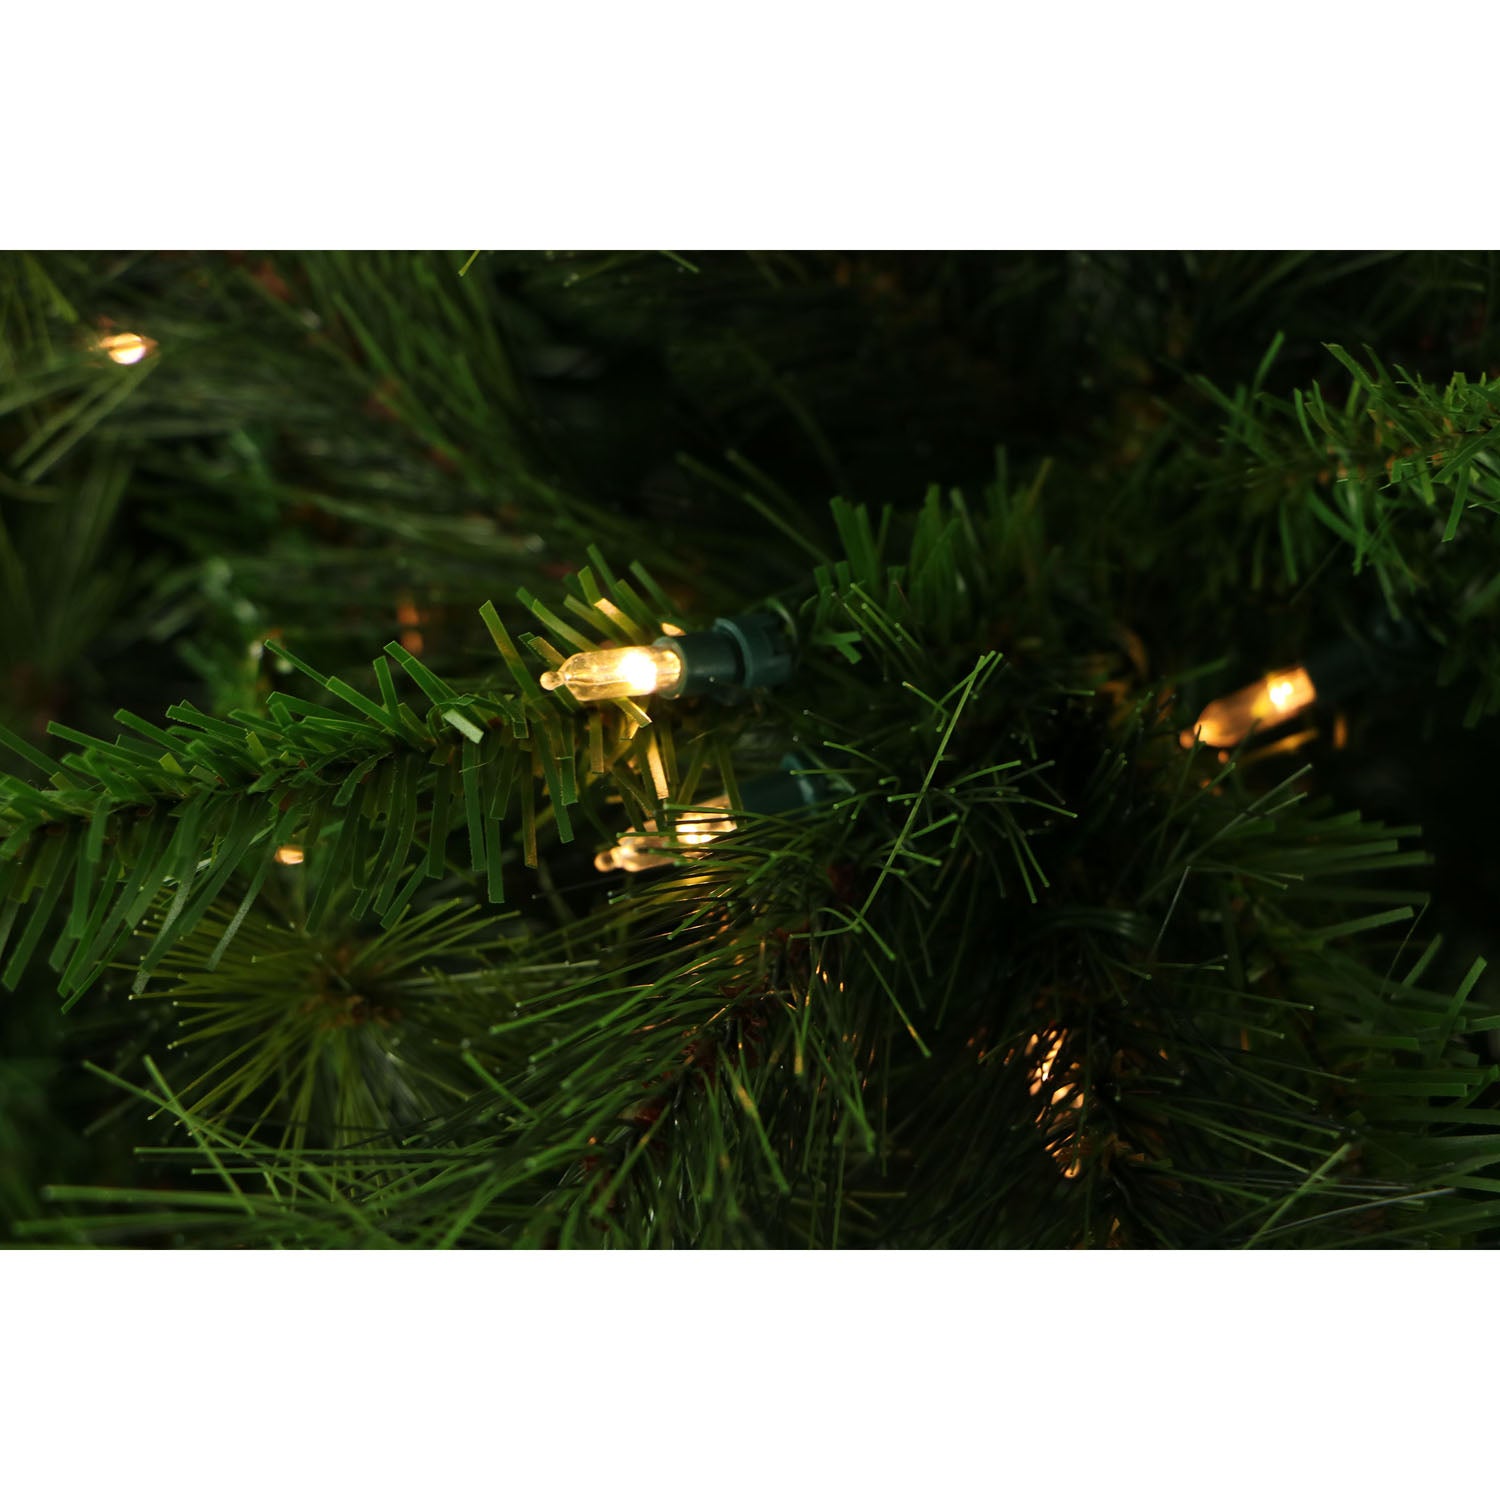 Fraser Hill Farm -  6.5-Ft. Canyon Pine Christmas Tree with Smart String Lighting